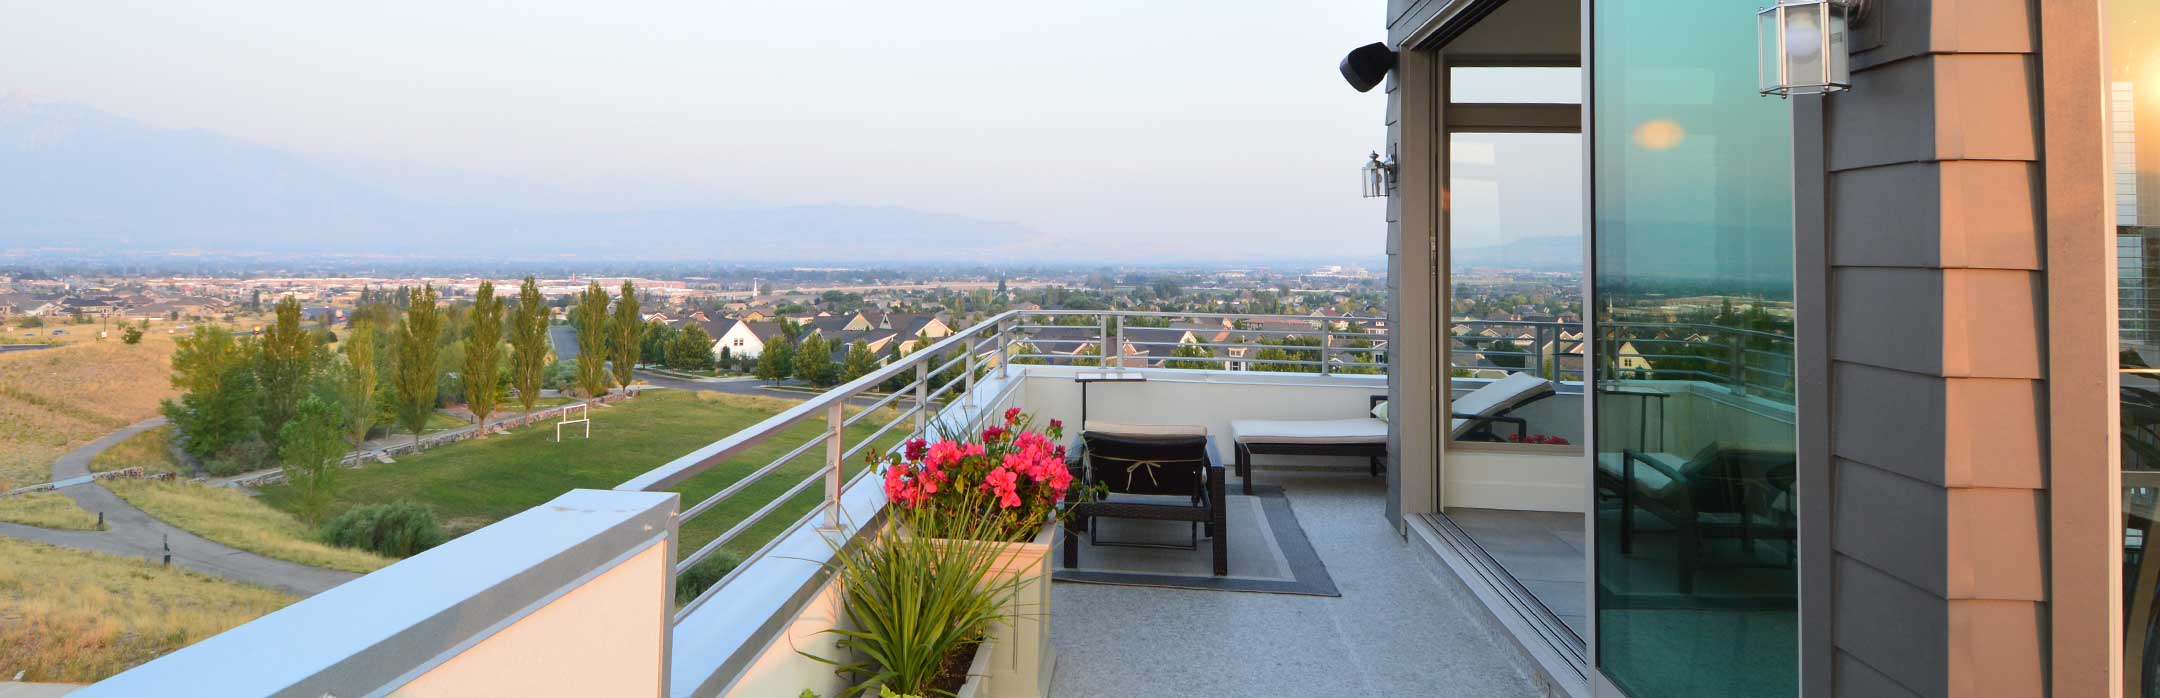 Roof Deck Designed for Views in Salt Lake City by Sego Homes